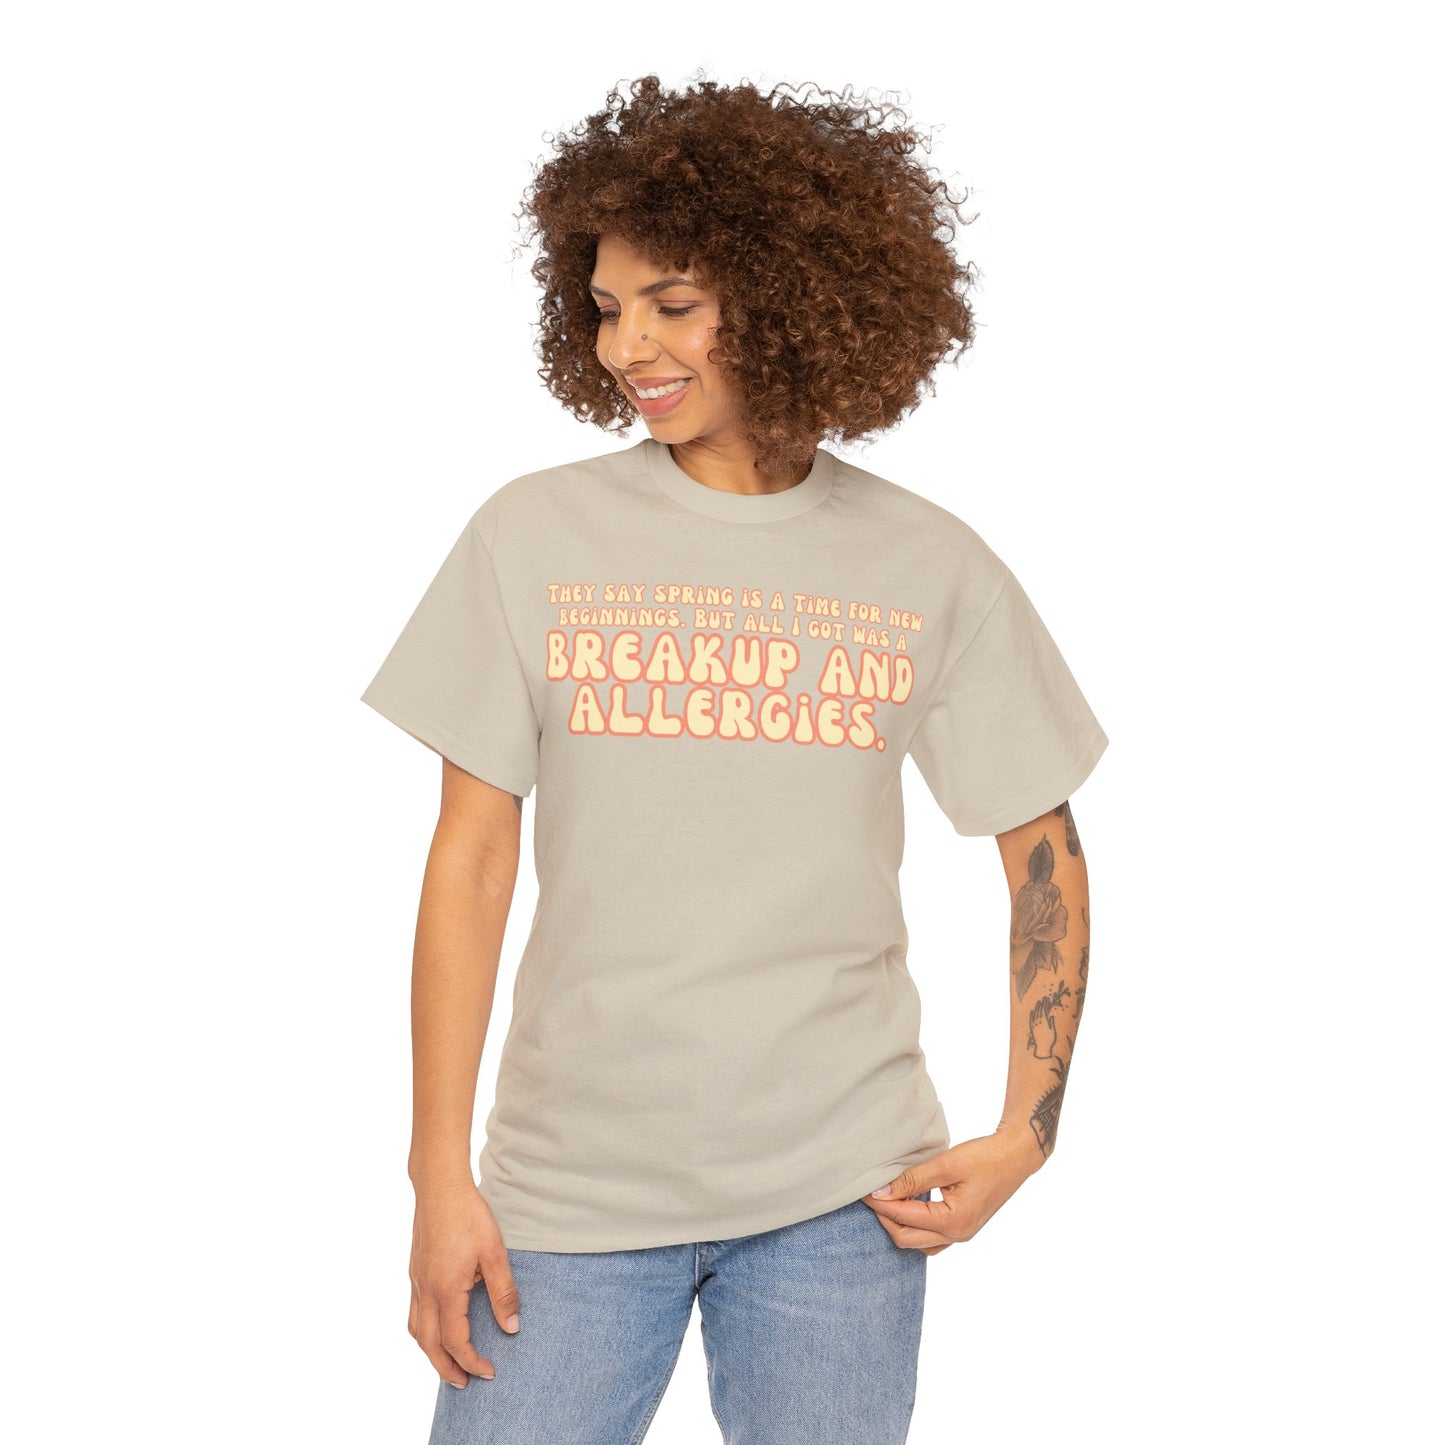 They Say Spring Is A Time For New Beginnings. But All I Got Was a Breakup And Allergies Tee